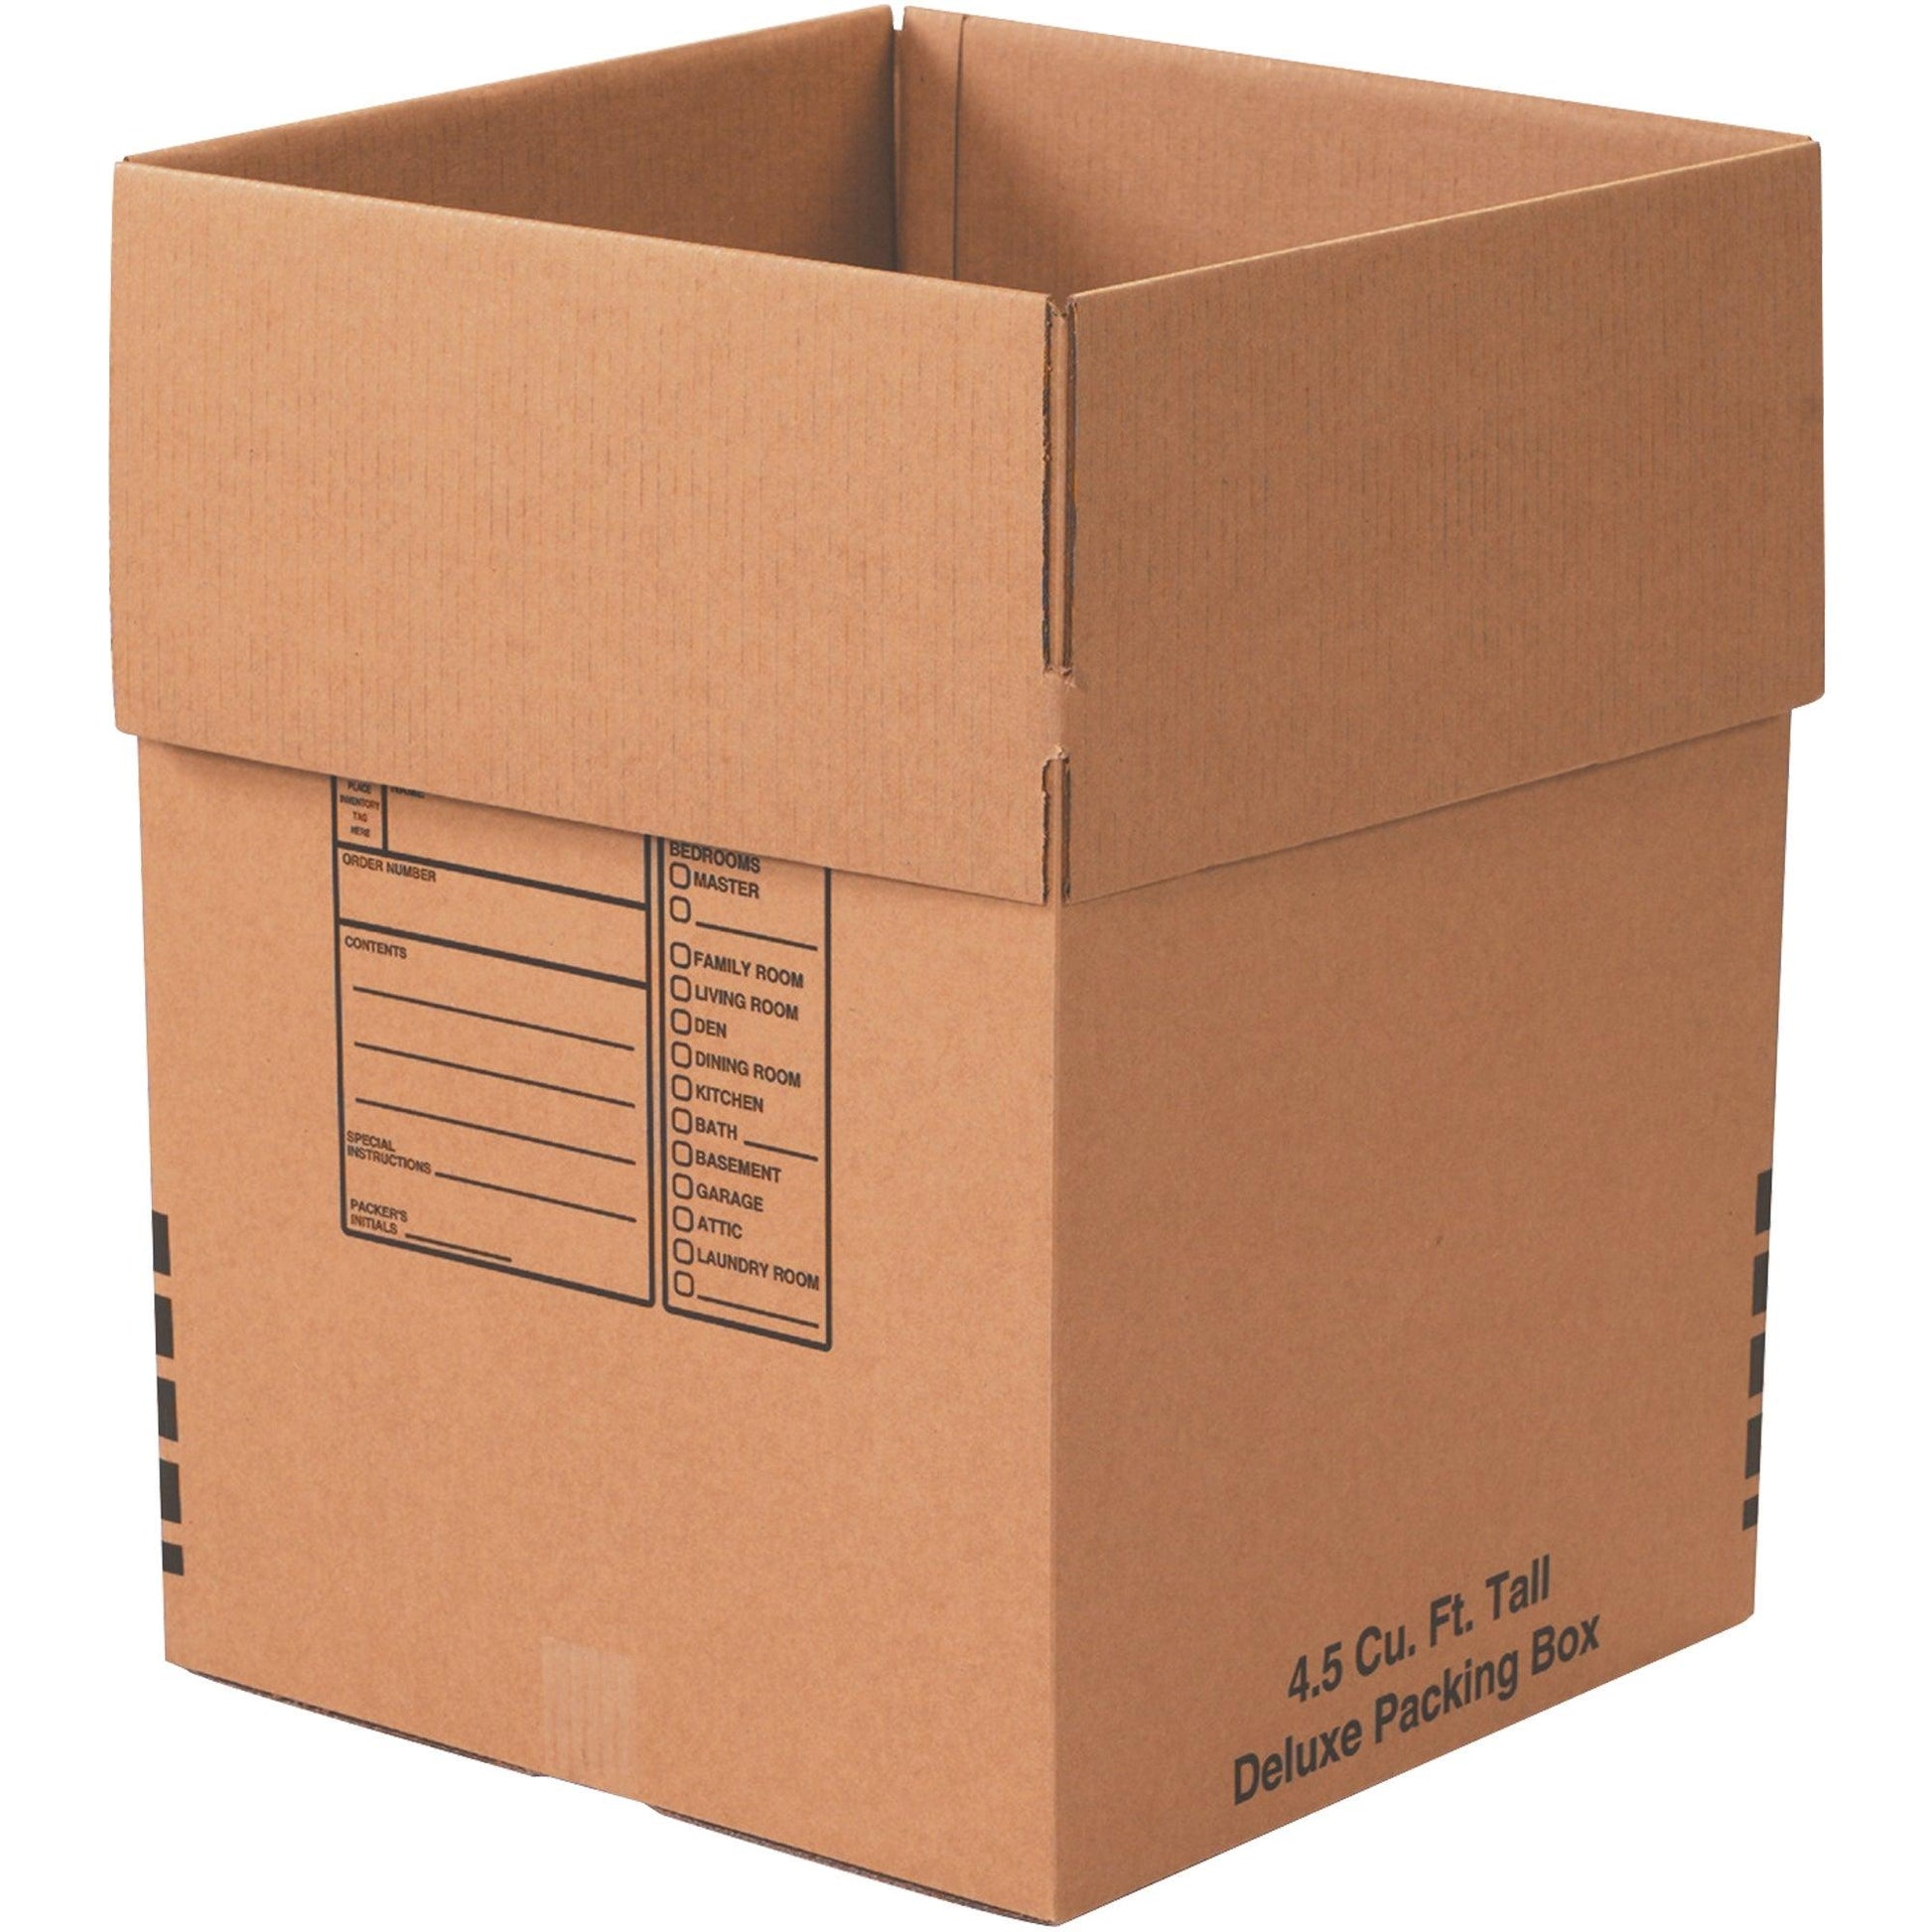 18 x 18 x 24" (6 Pack) Deluxe Packing Boxes - 181824DPBRP6